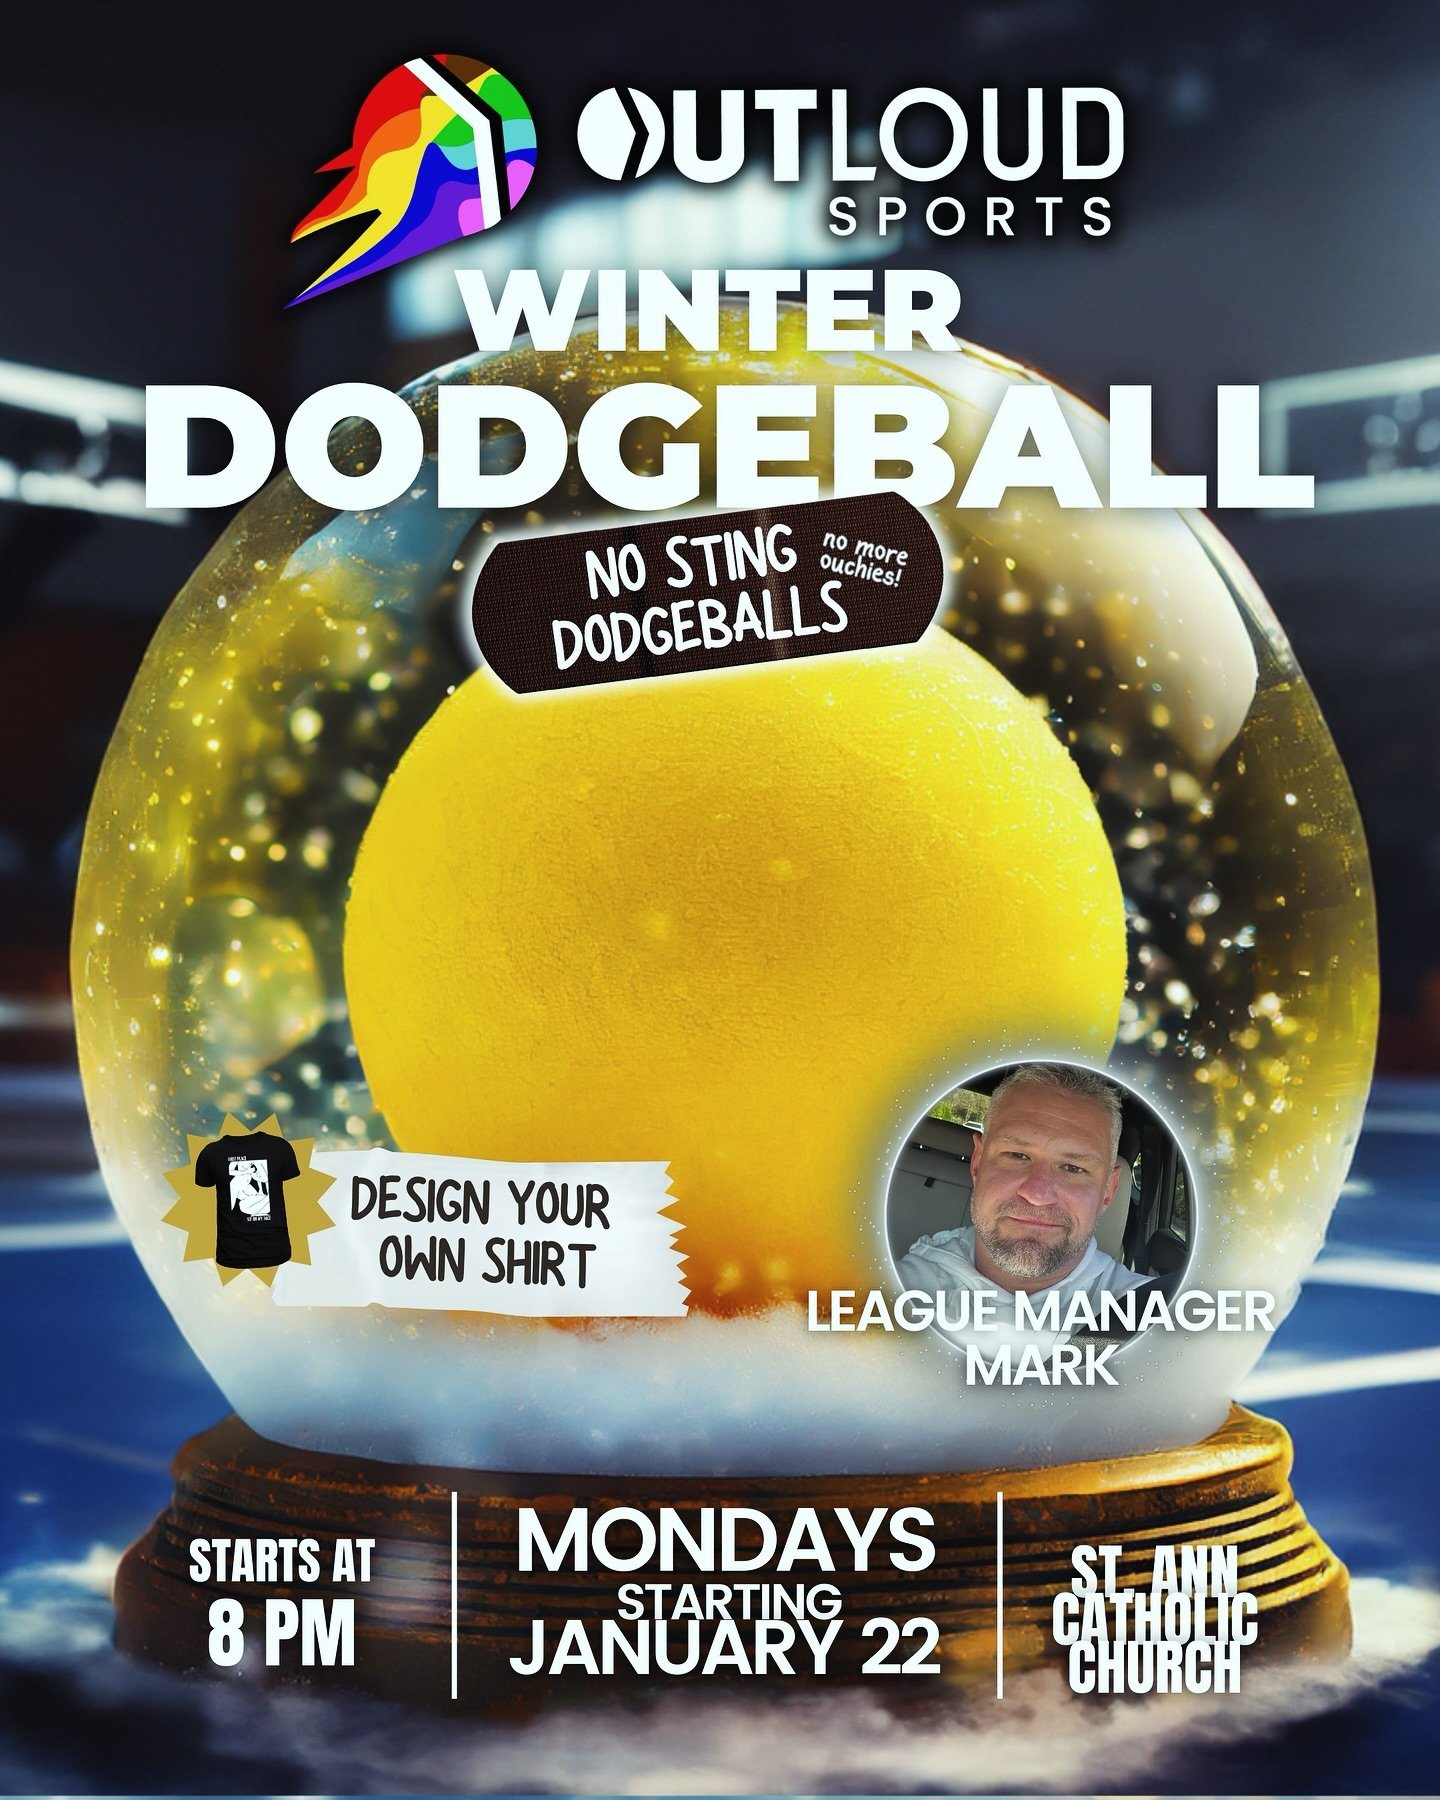 OutLoud Sports 28th city brings Dodgeball to DC! Open to everyone, our No-Sting league will bring action to Monday nights with weekly socials after! Come and join the fun! https://outlouddc.leagueapps.com/leagues